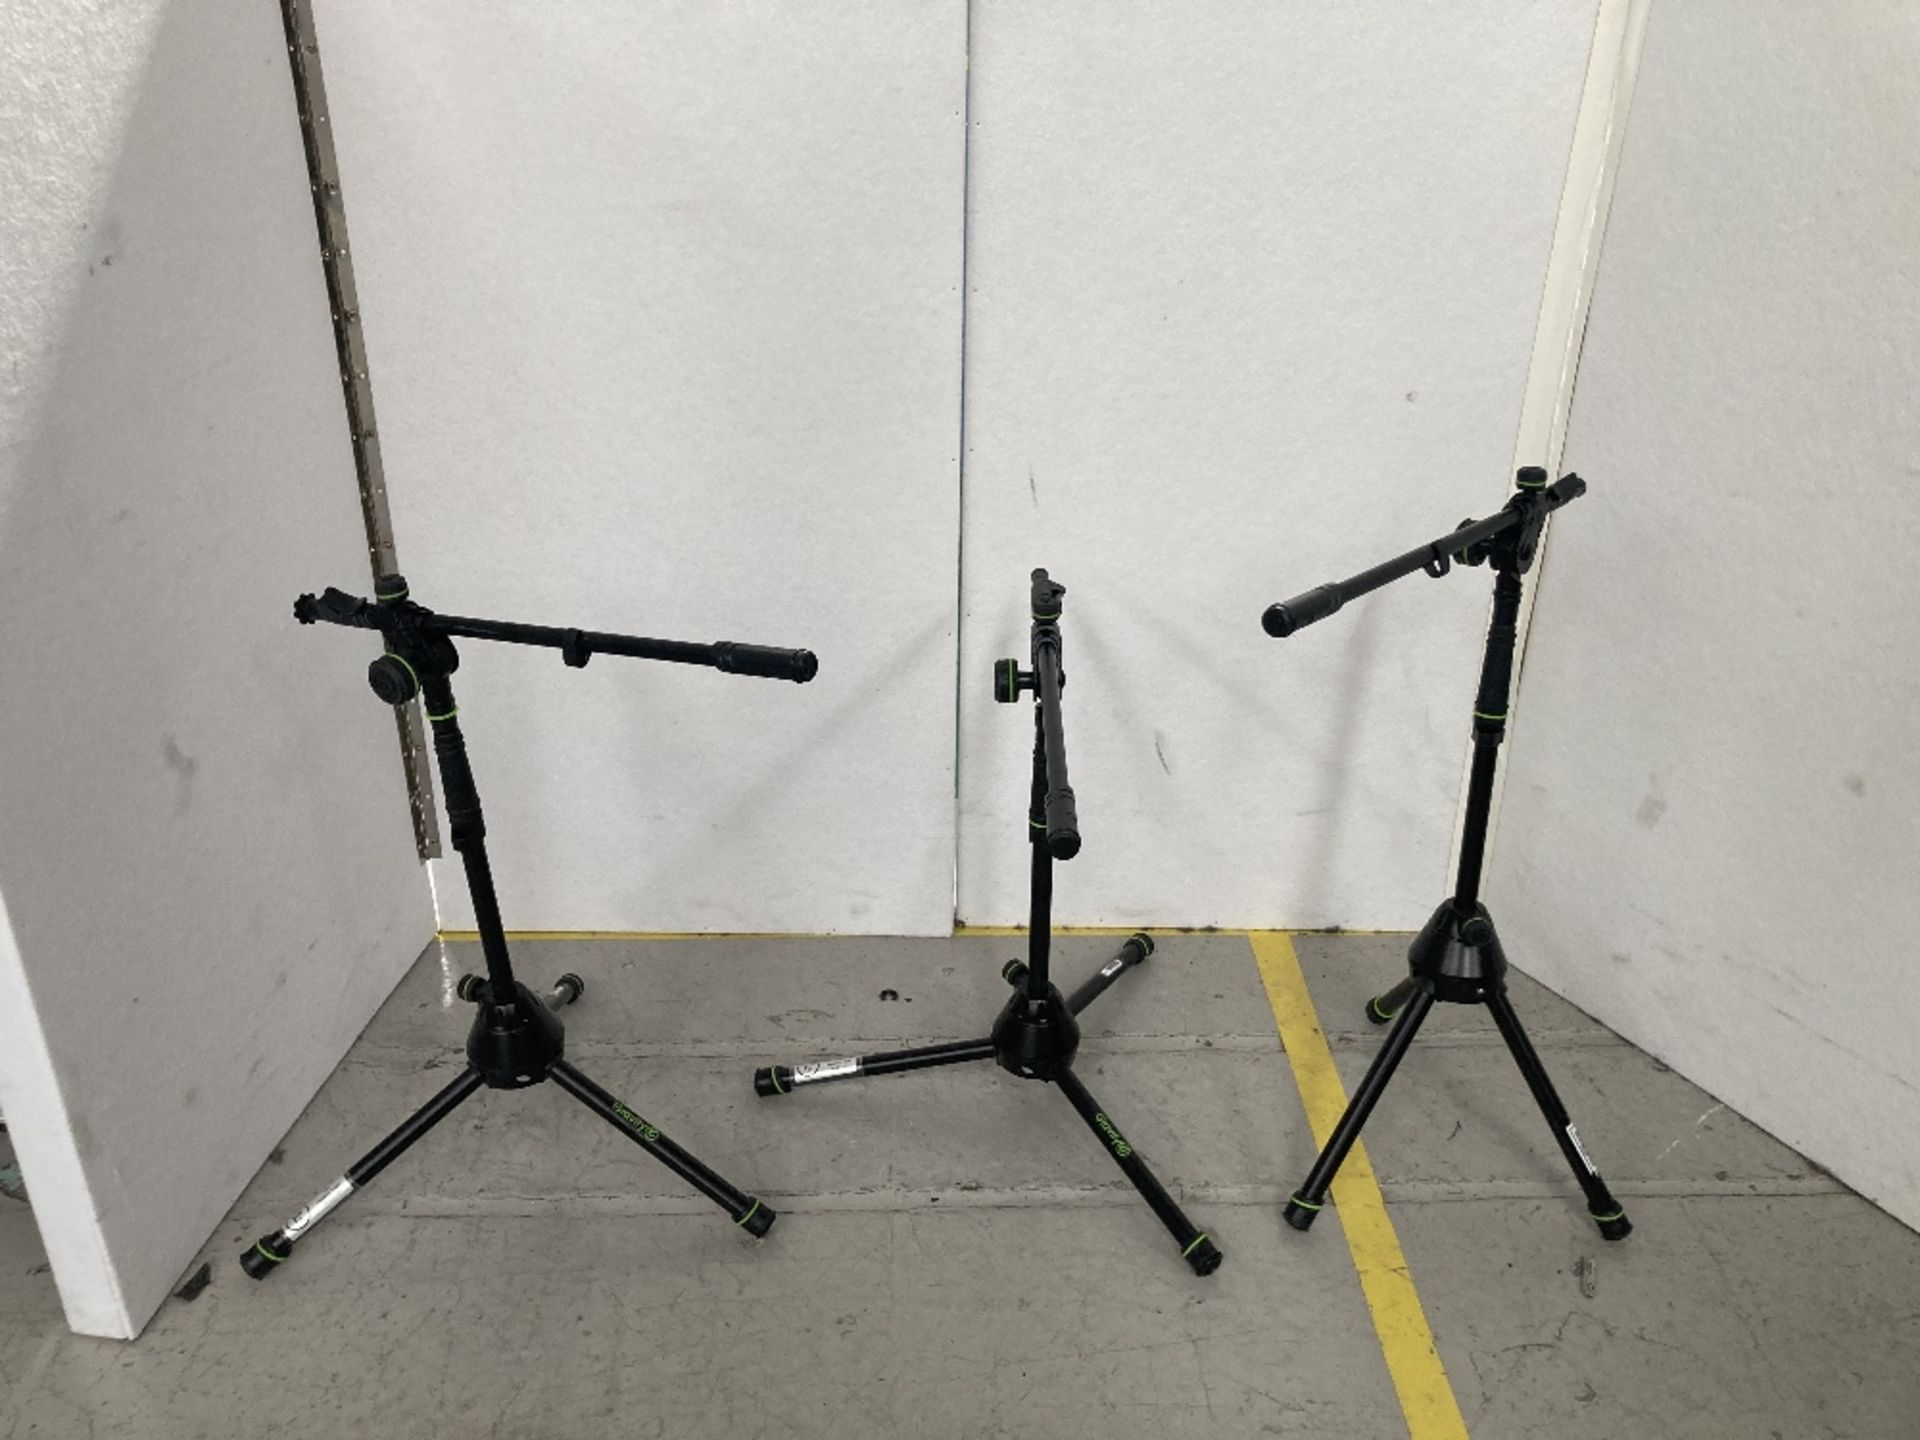 (3) Gravity Tripod Microphone Stand Black & Padded Carry Case